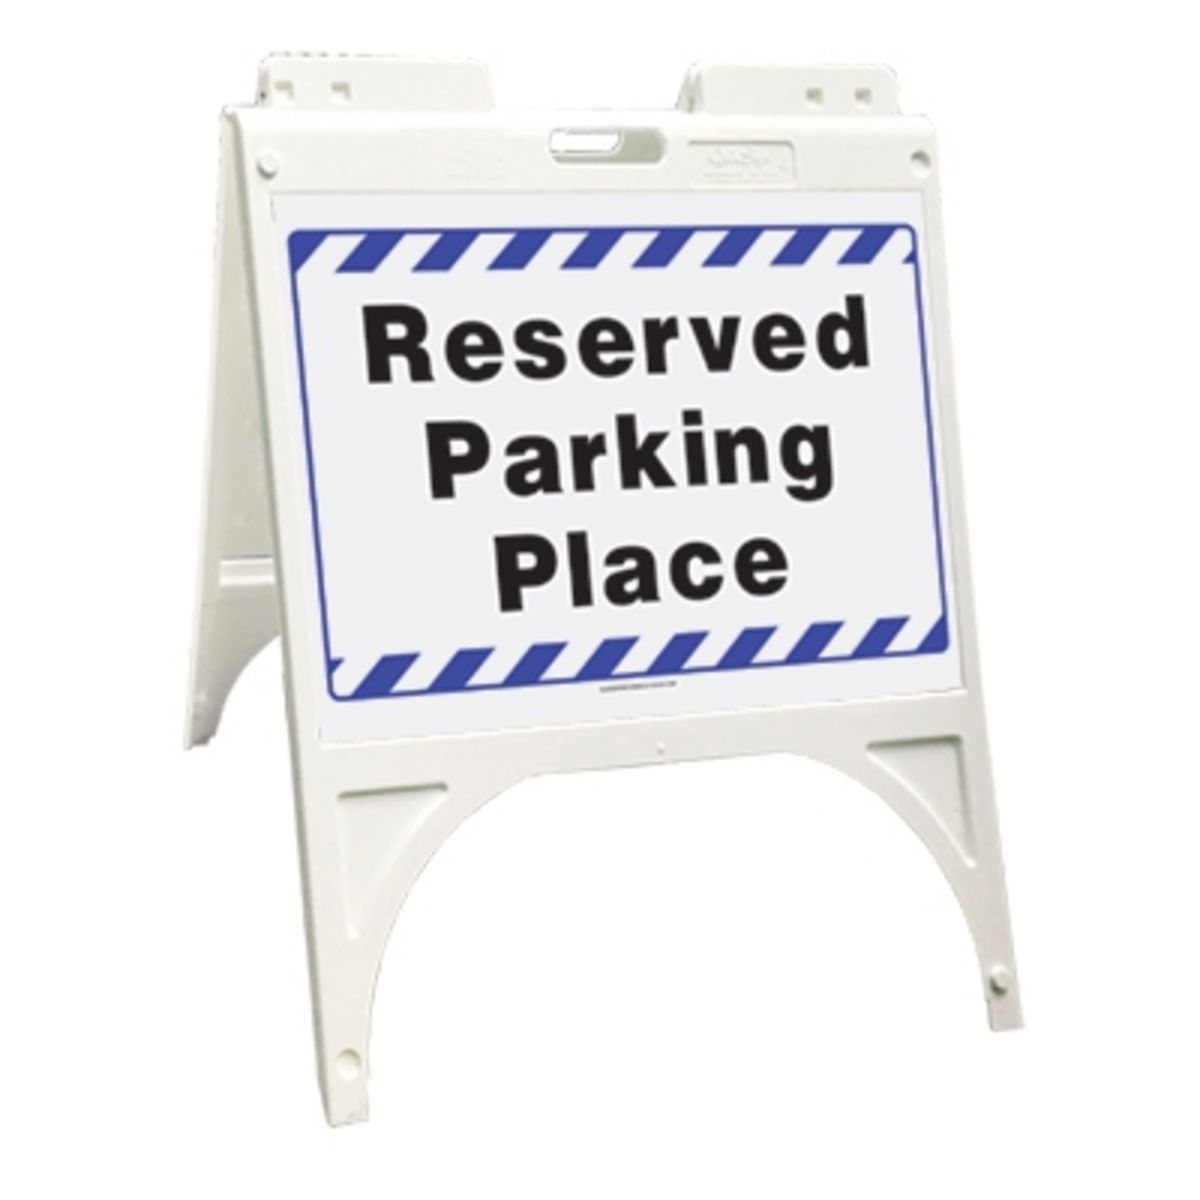 QuikSign - Reserved Parking Space.jpg